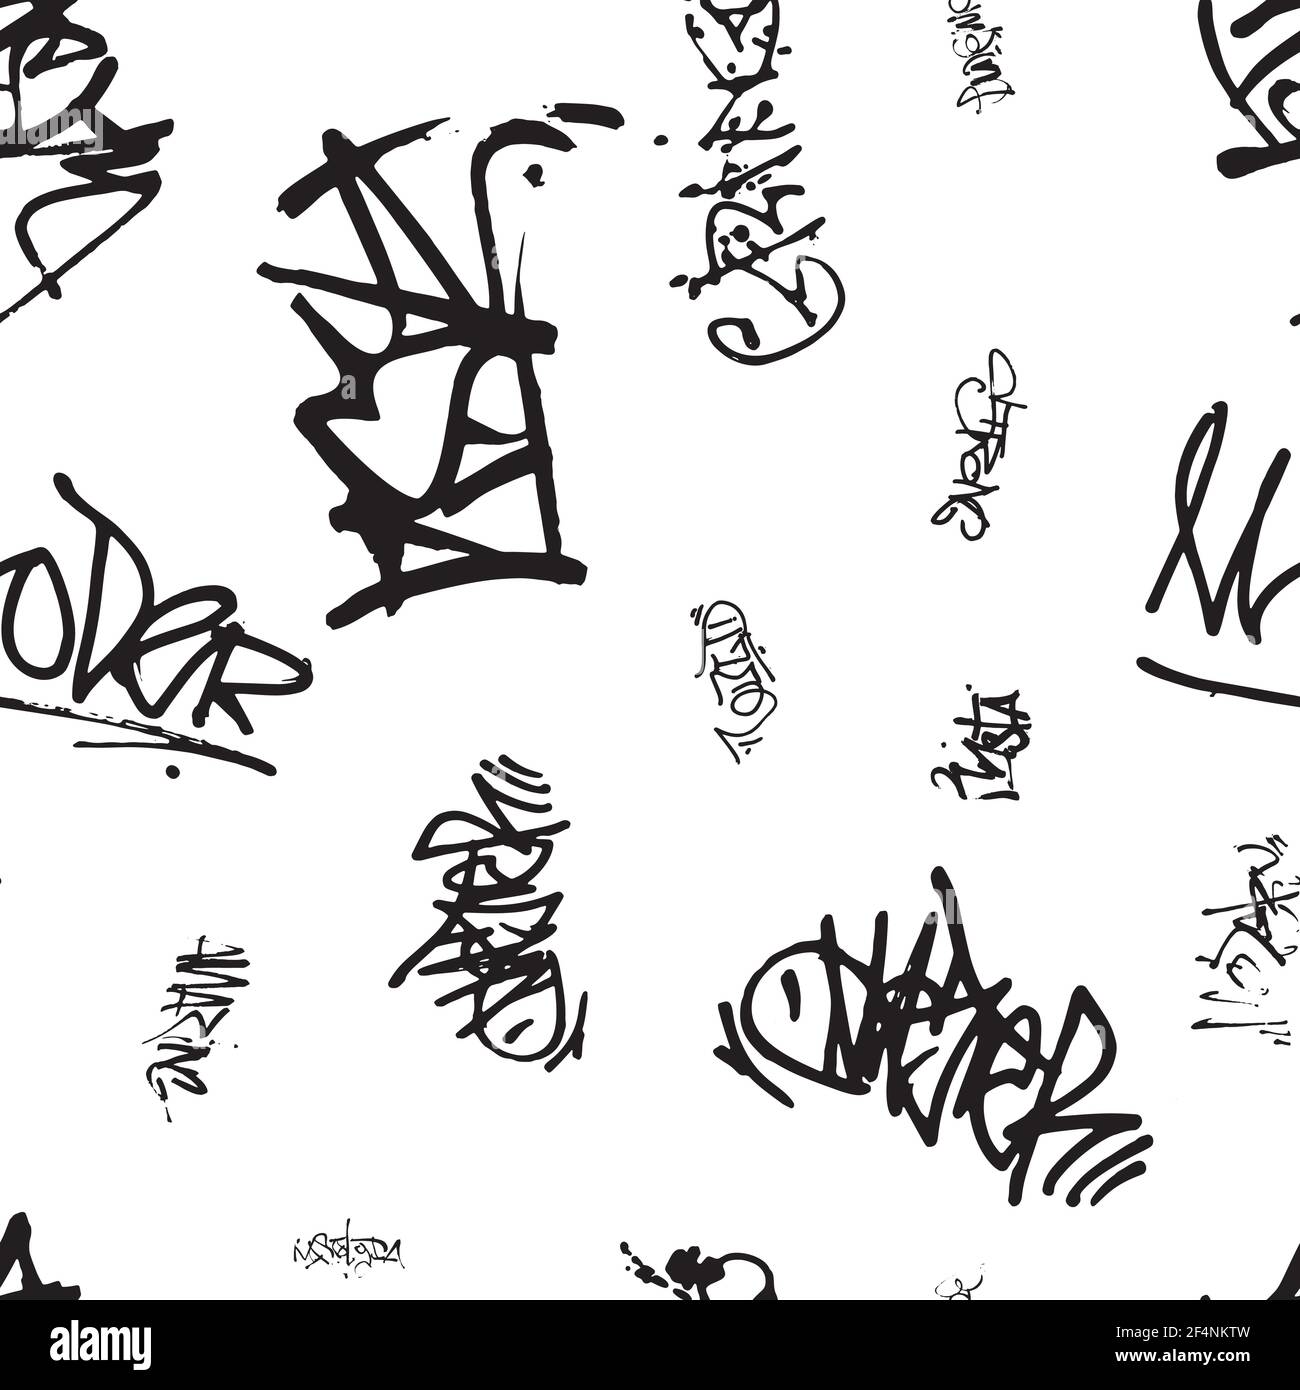 https://c8.alamy.com/comp/2F4NKTW/vector-graffiti-seamless-pattern-with-abstract-tags-letters-without-meaning-fashion-hand-drawing-texture-street-art-retro-style-old-school-design-2F4NKTW.jpg